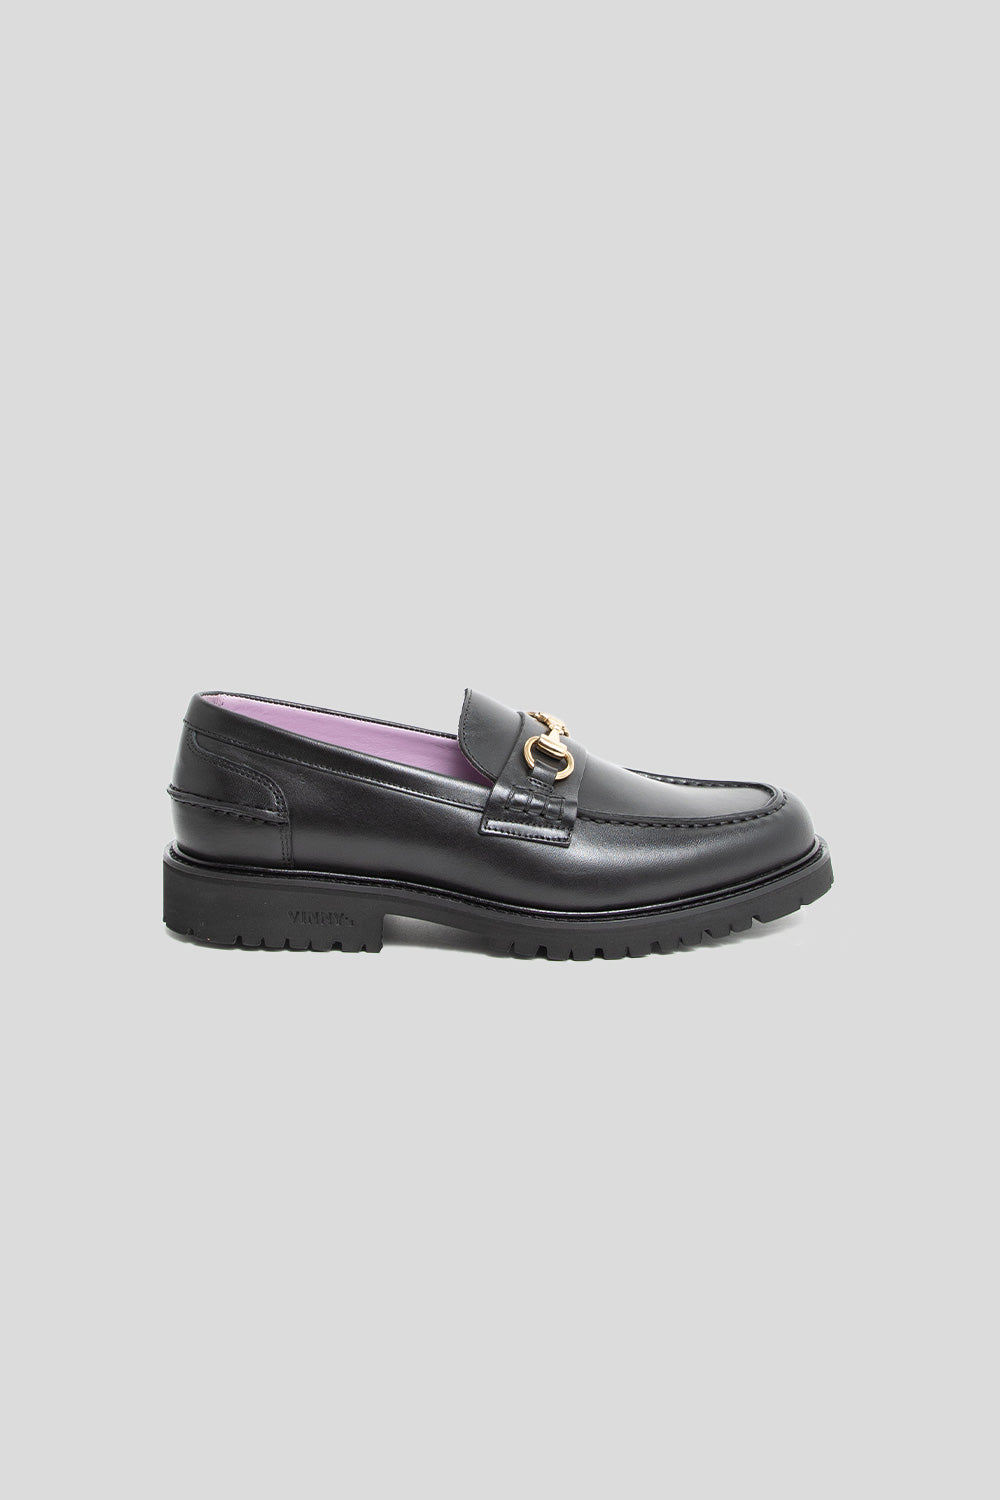 Vinny's Shoes & Loafers | Wallace Mercantile Shop